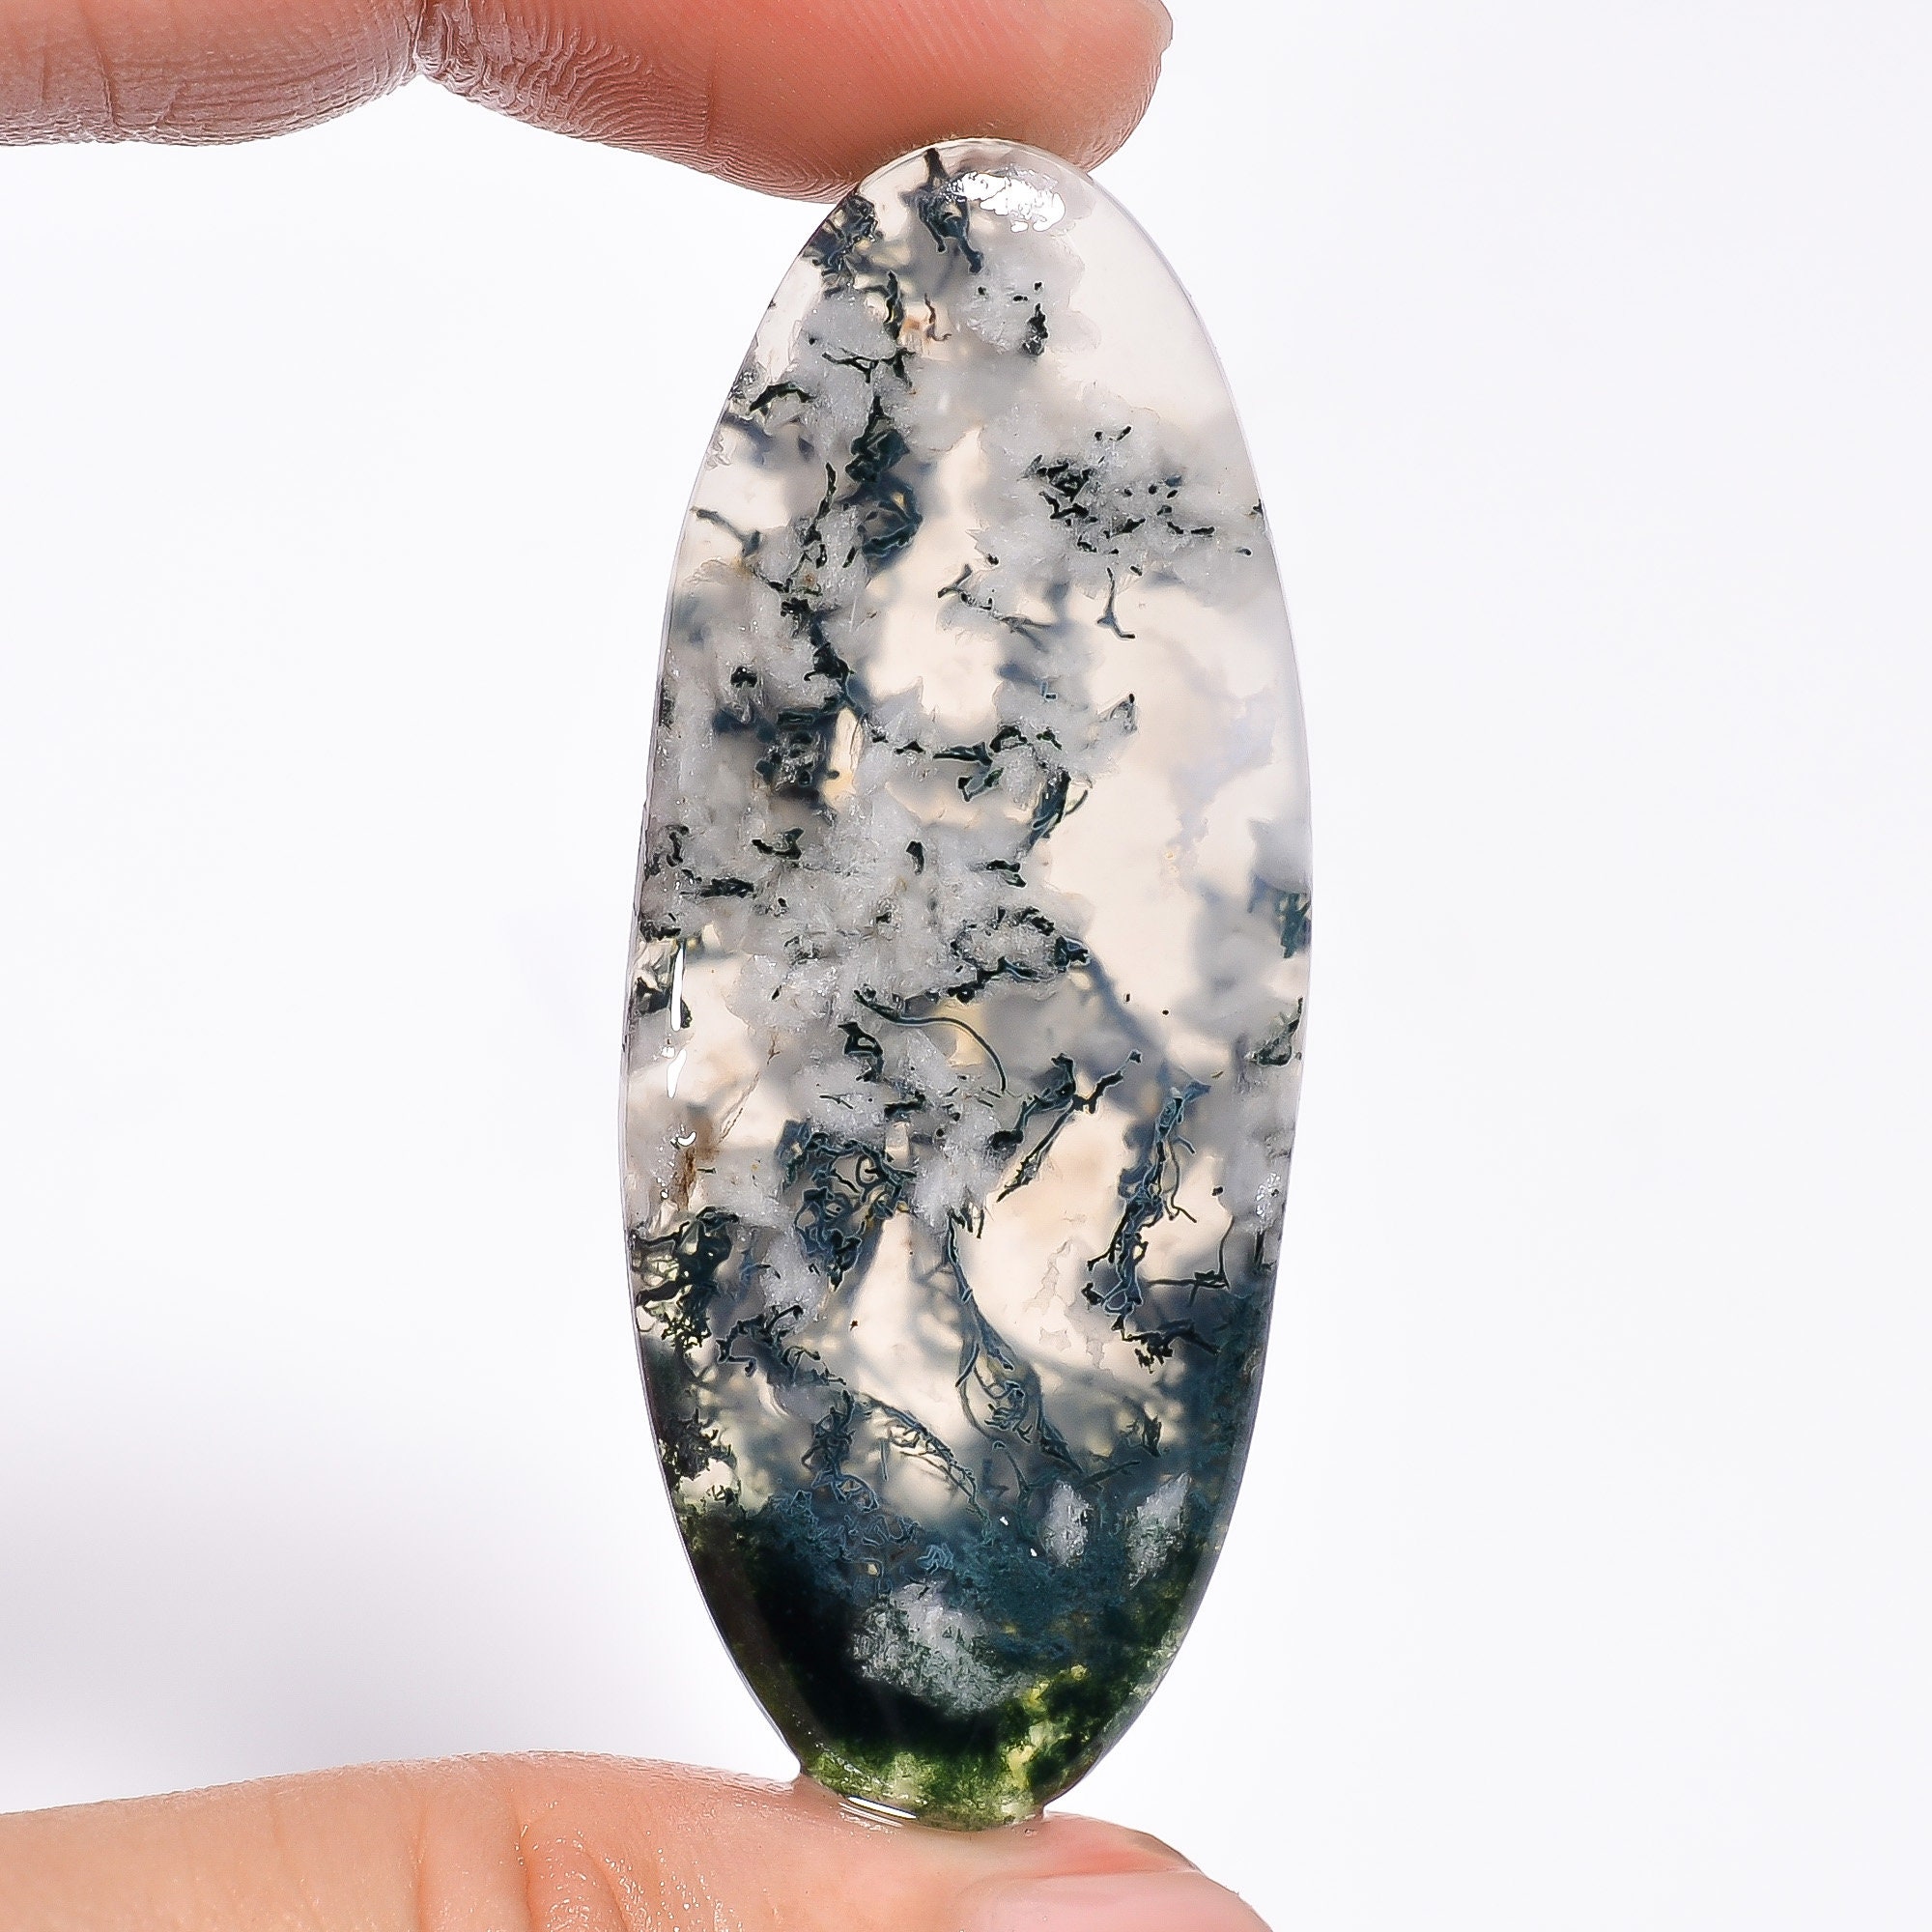 Gorgeous Top Grade Quality 100% Natural Moss Agate Oval Shape Cabochon Loose Gemstone For Making Jewelry 21.5 Ct 34X23X3 mm H-4626